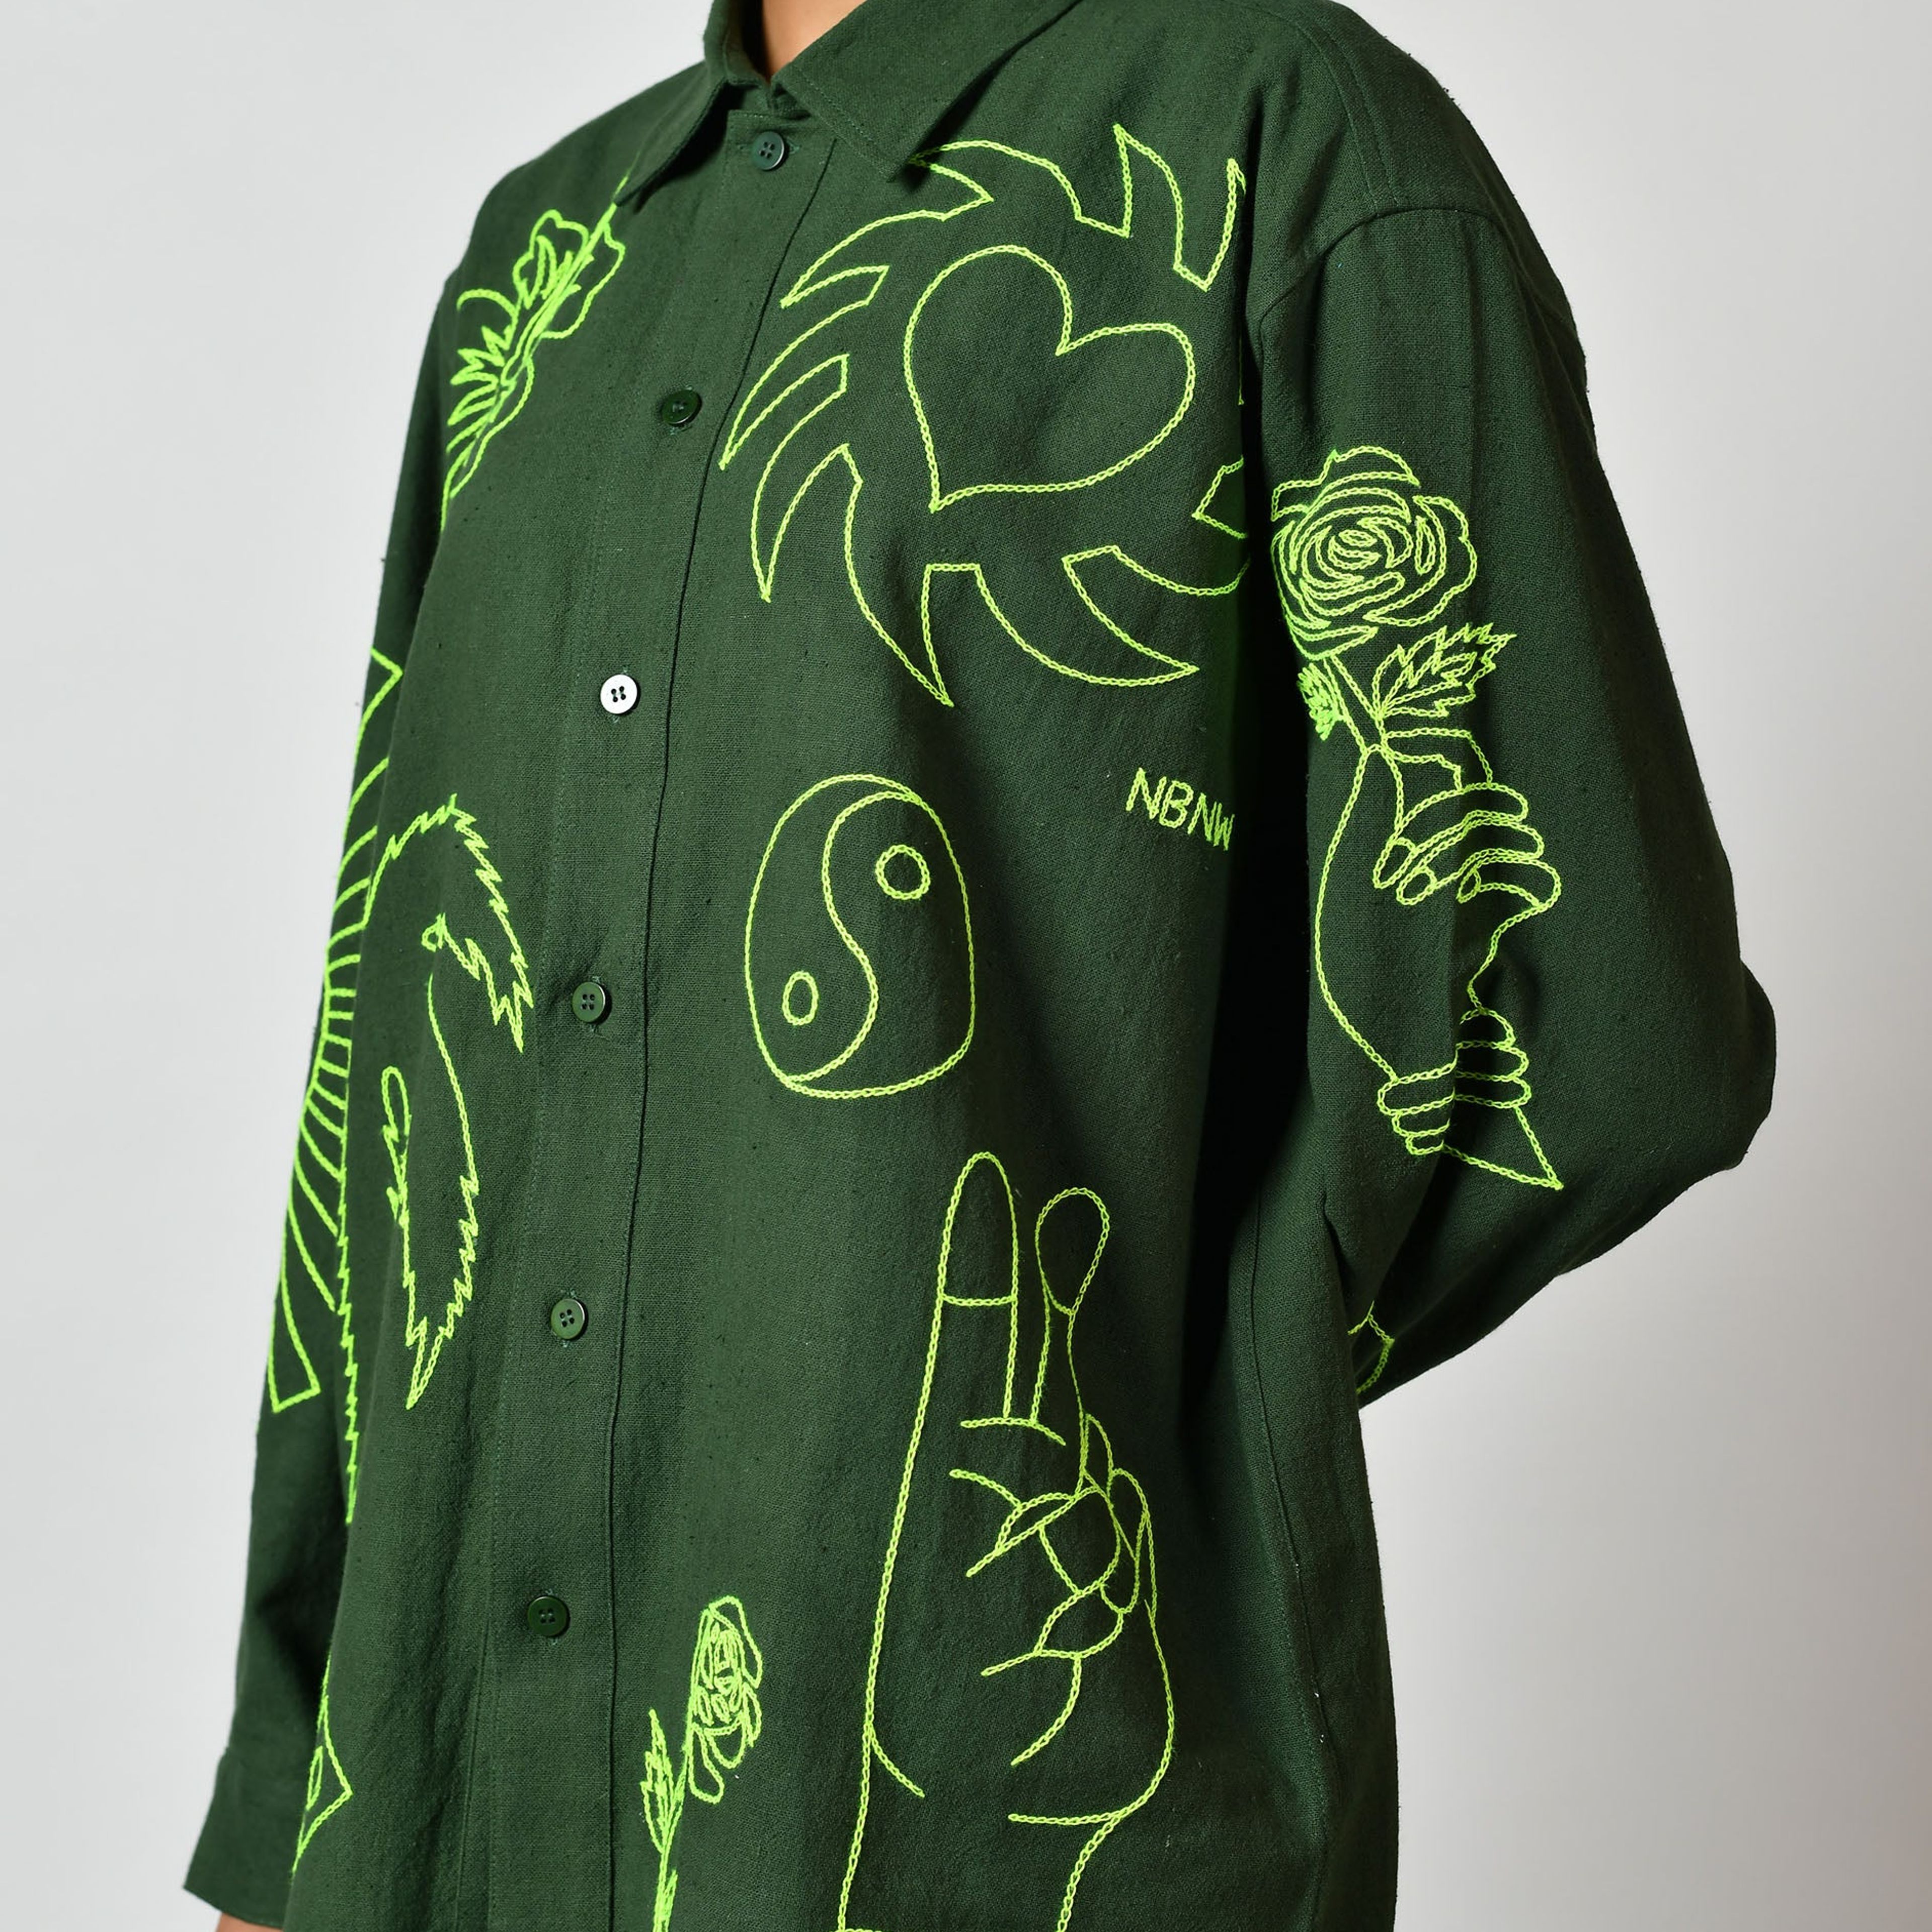 Keep it Classic Embroidered Shirt